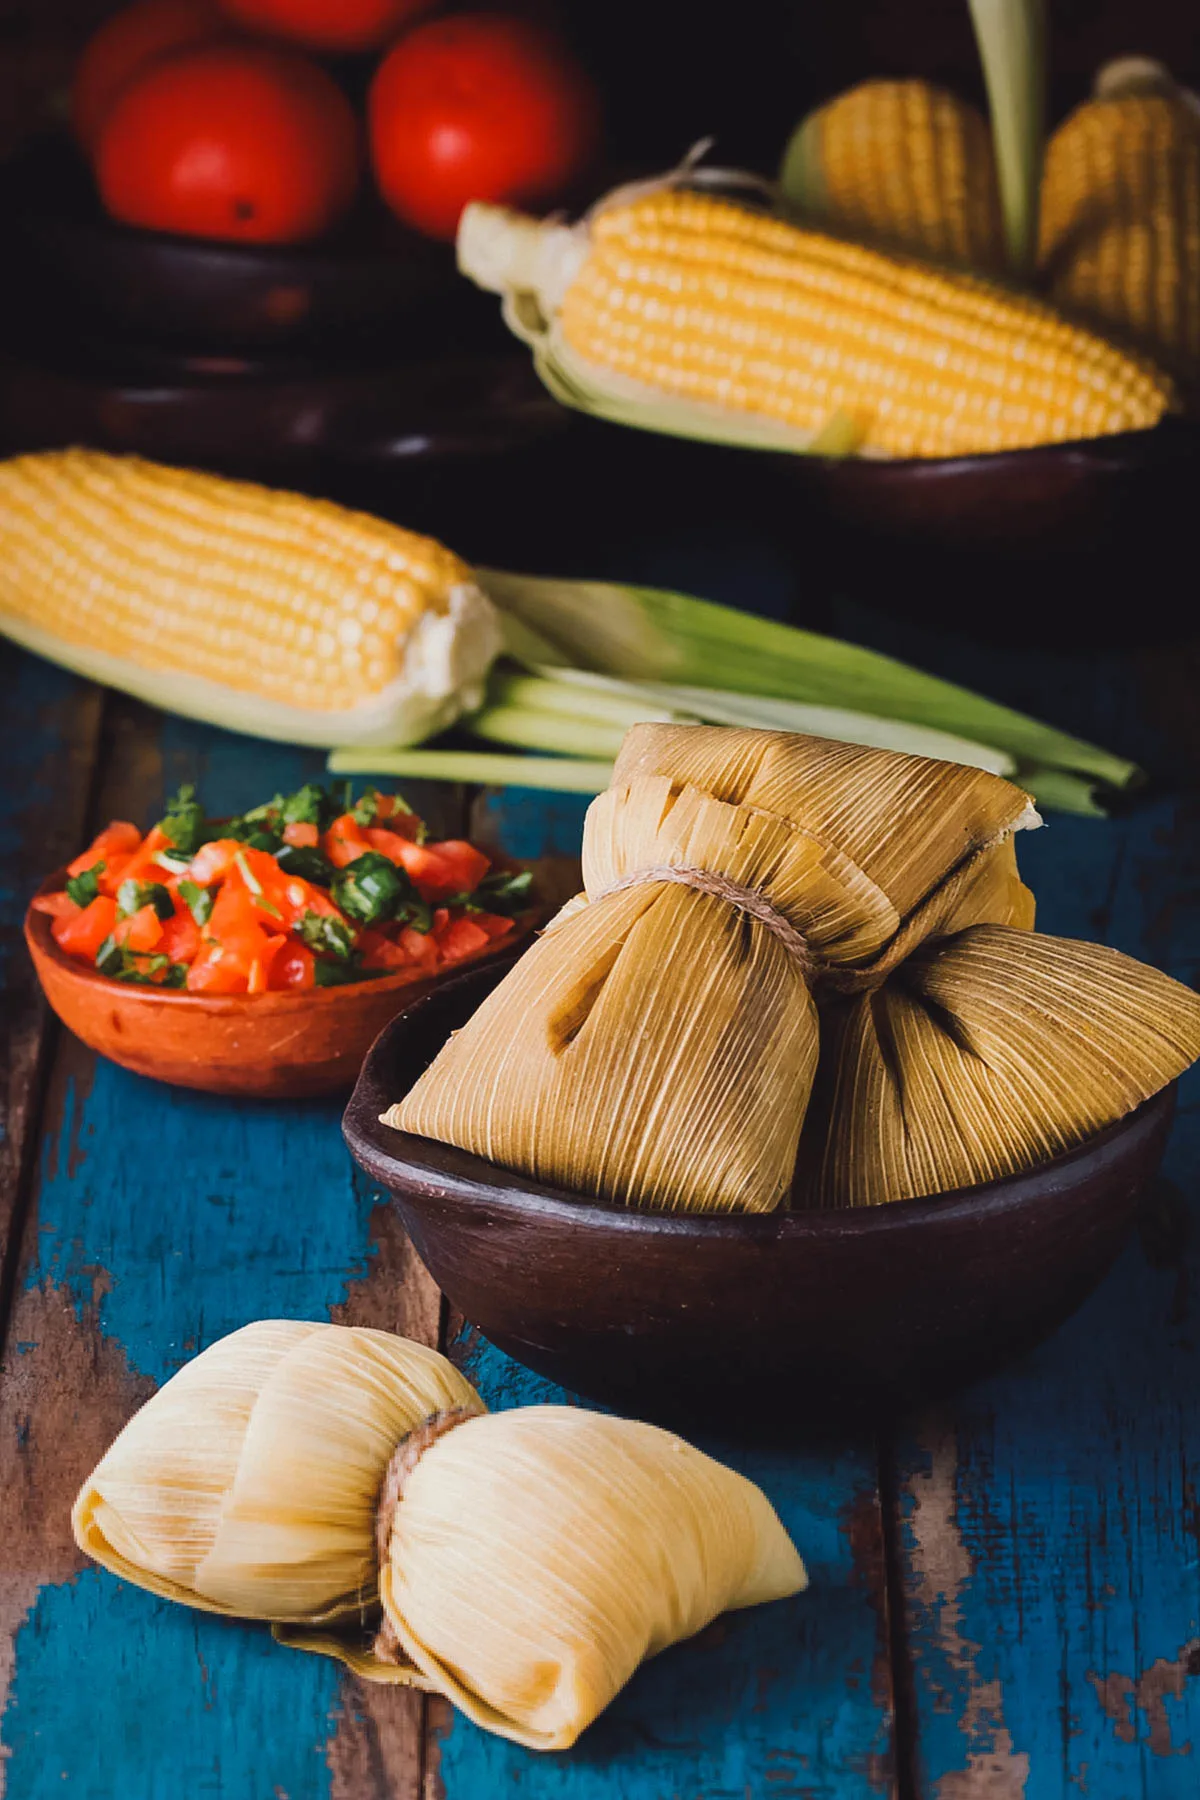 Bowl of humitas, a traditional Ecuadorian food made with freshly ground corn